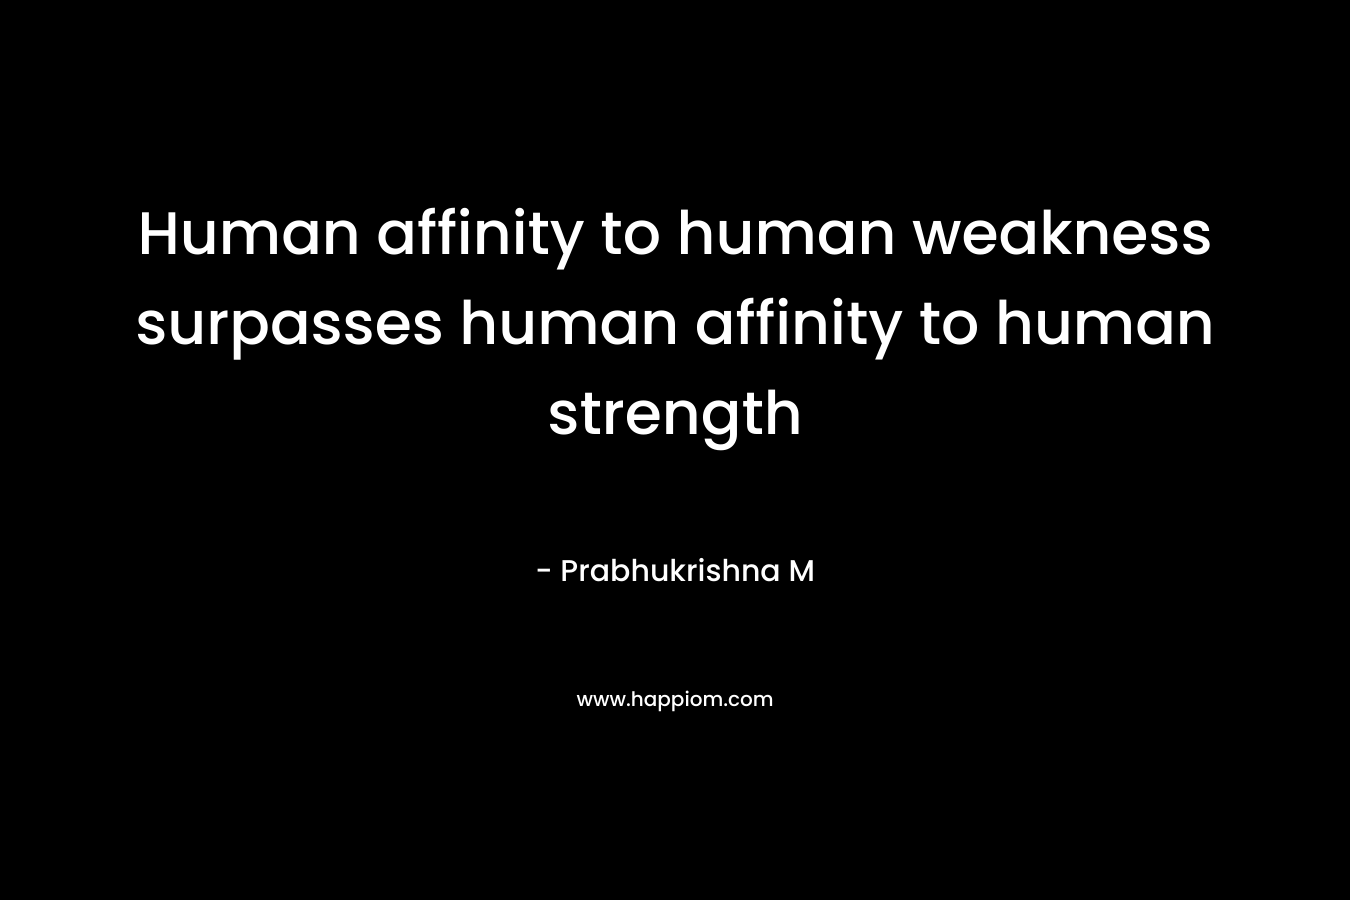 Human affinity to human weakness surpasses human affinity to human strength